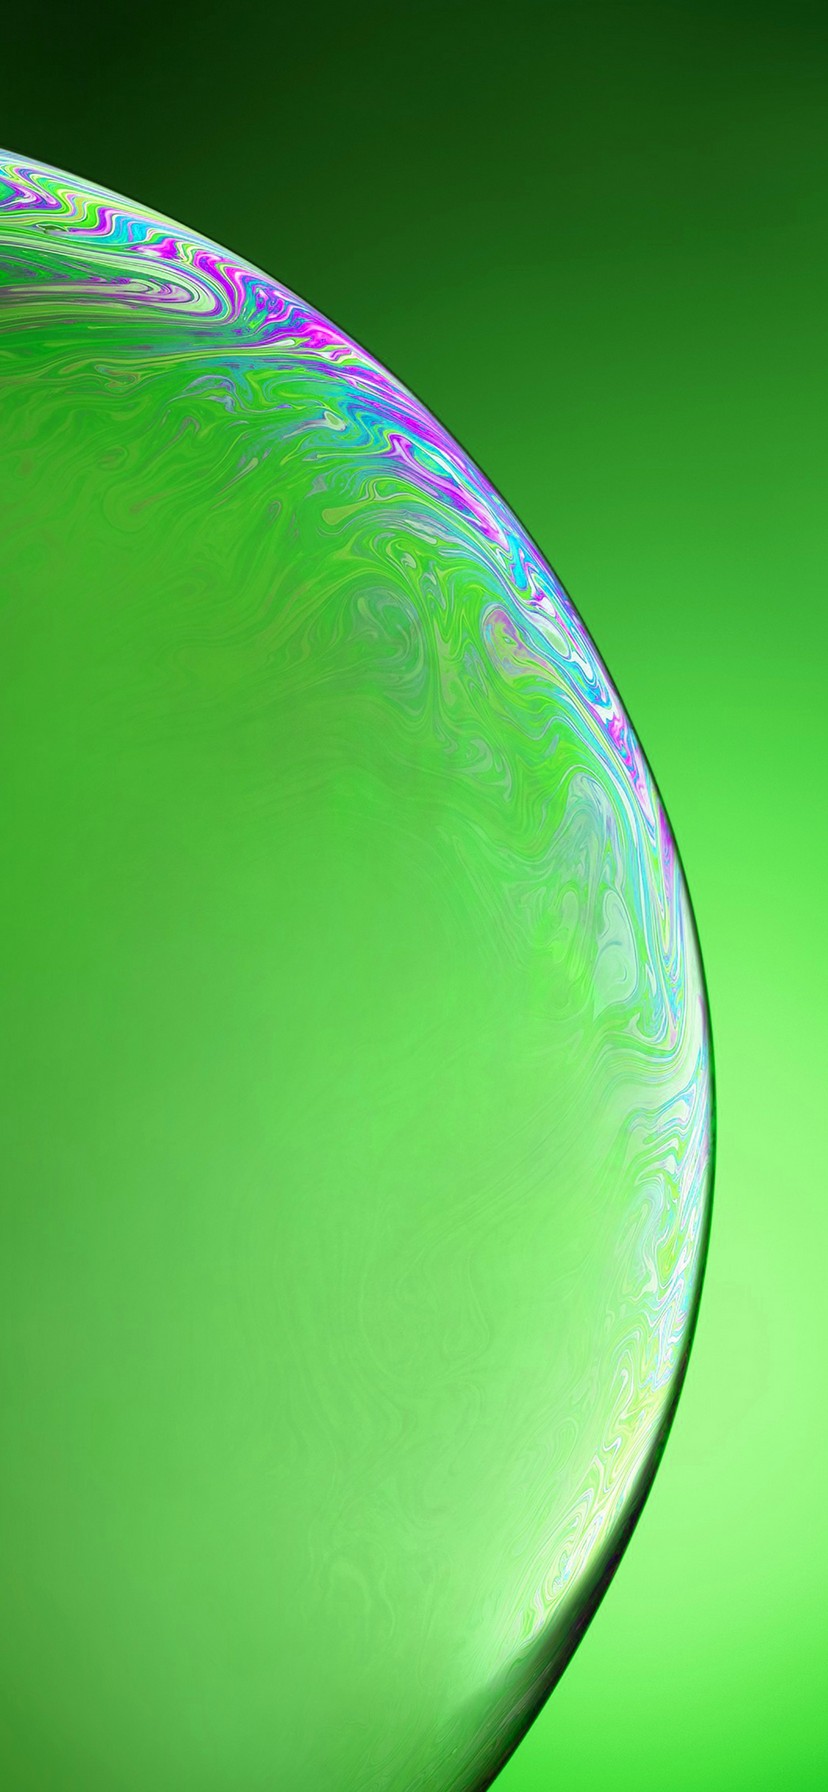 iPhone XR Wallpaper With high-resolution 828X1792 pixel. You can set as wallpaper for Apple iPhone X, XS Max, XR, 8, 7, 6, SE, iPad. Enjoy and share your favorite HD wallpapers and background images